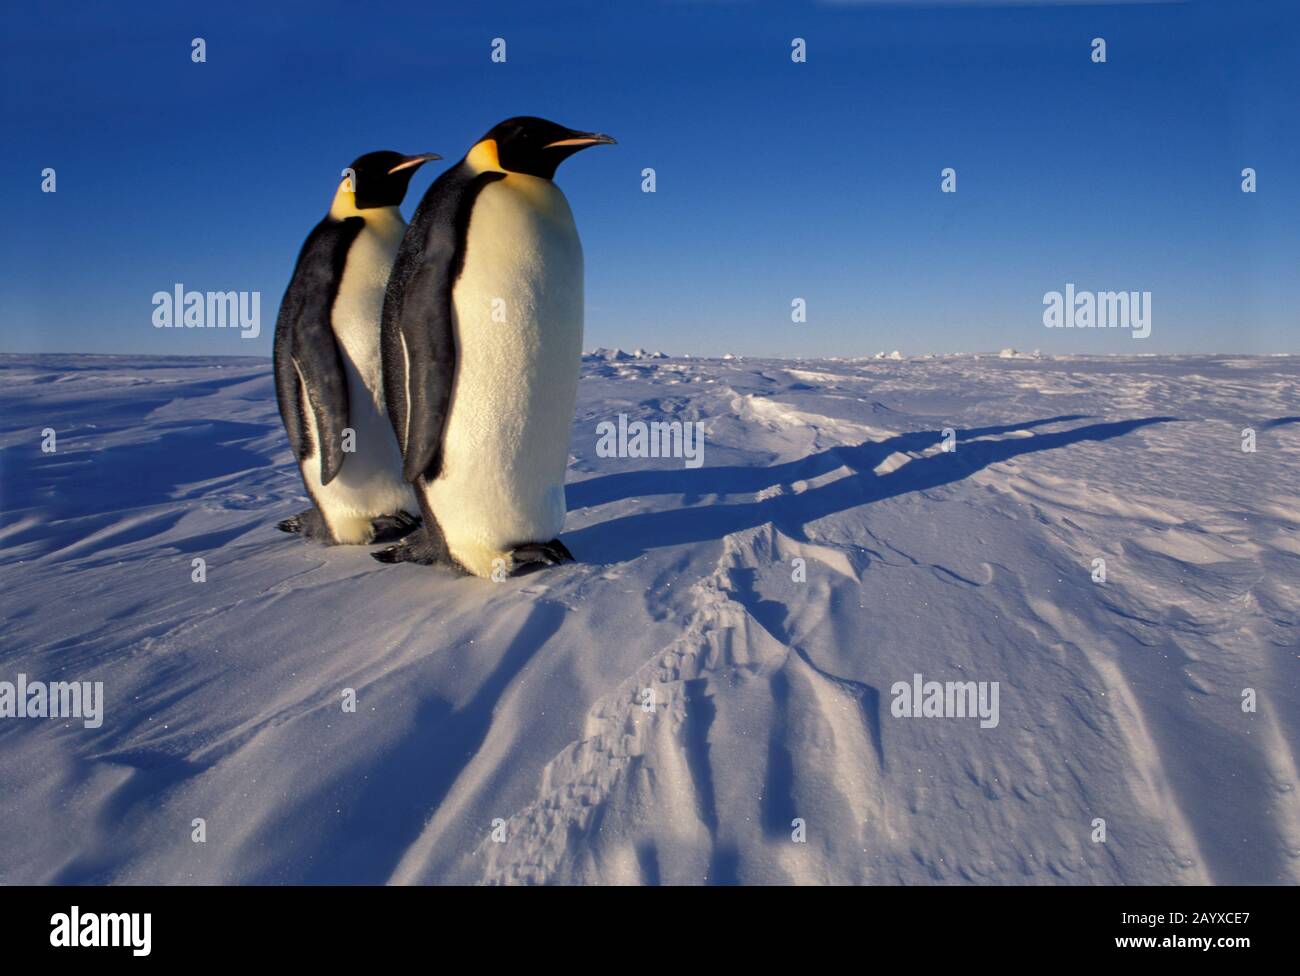 Two Emperor penguins (Aptenodytes forsteri) standing on fast ice near the Atka Iceport  at the Ekstrom Ice Shelf on the coast of Queen Maud Land in An Stock Photo